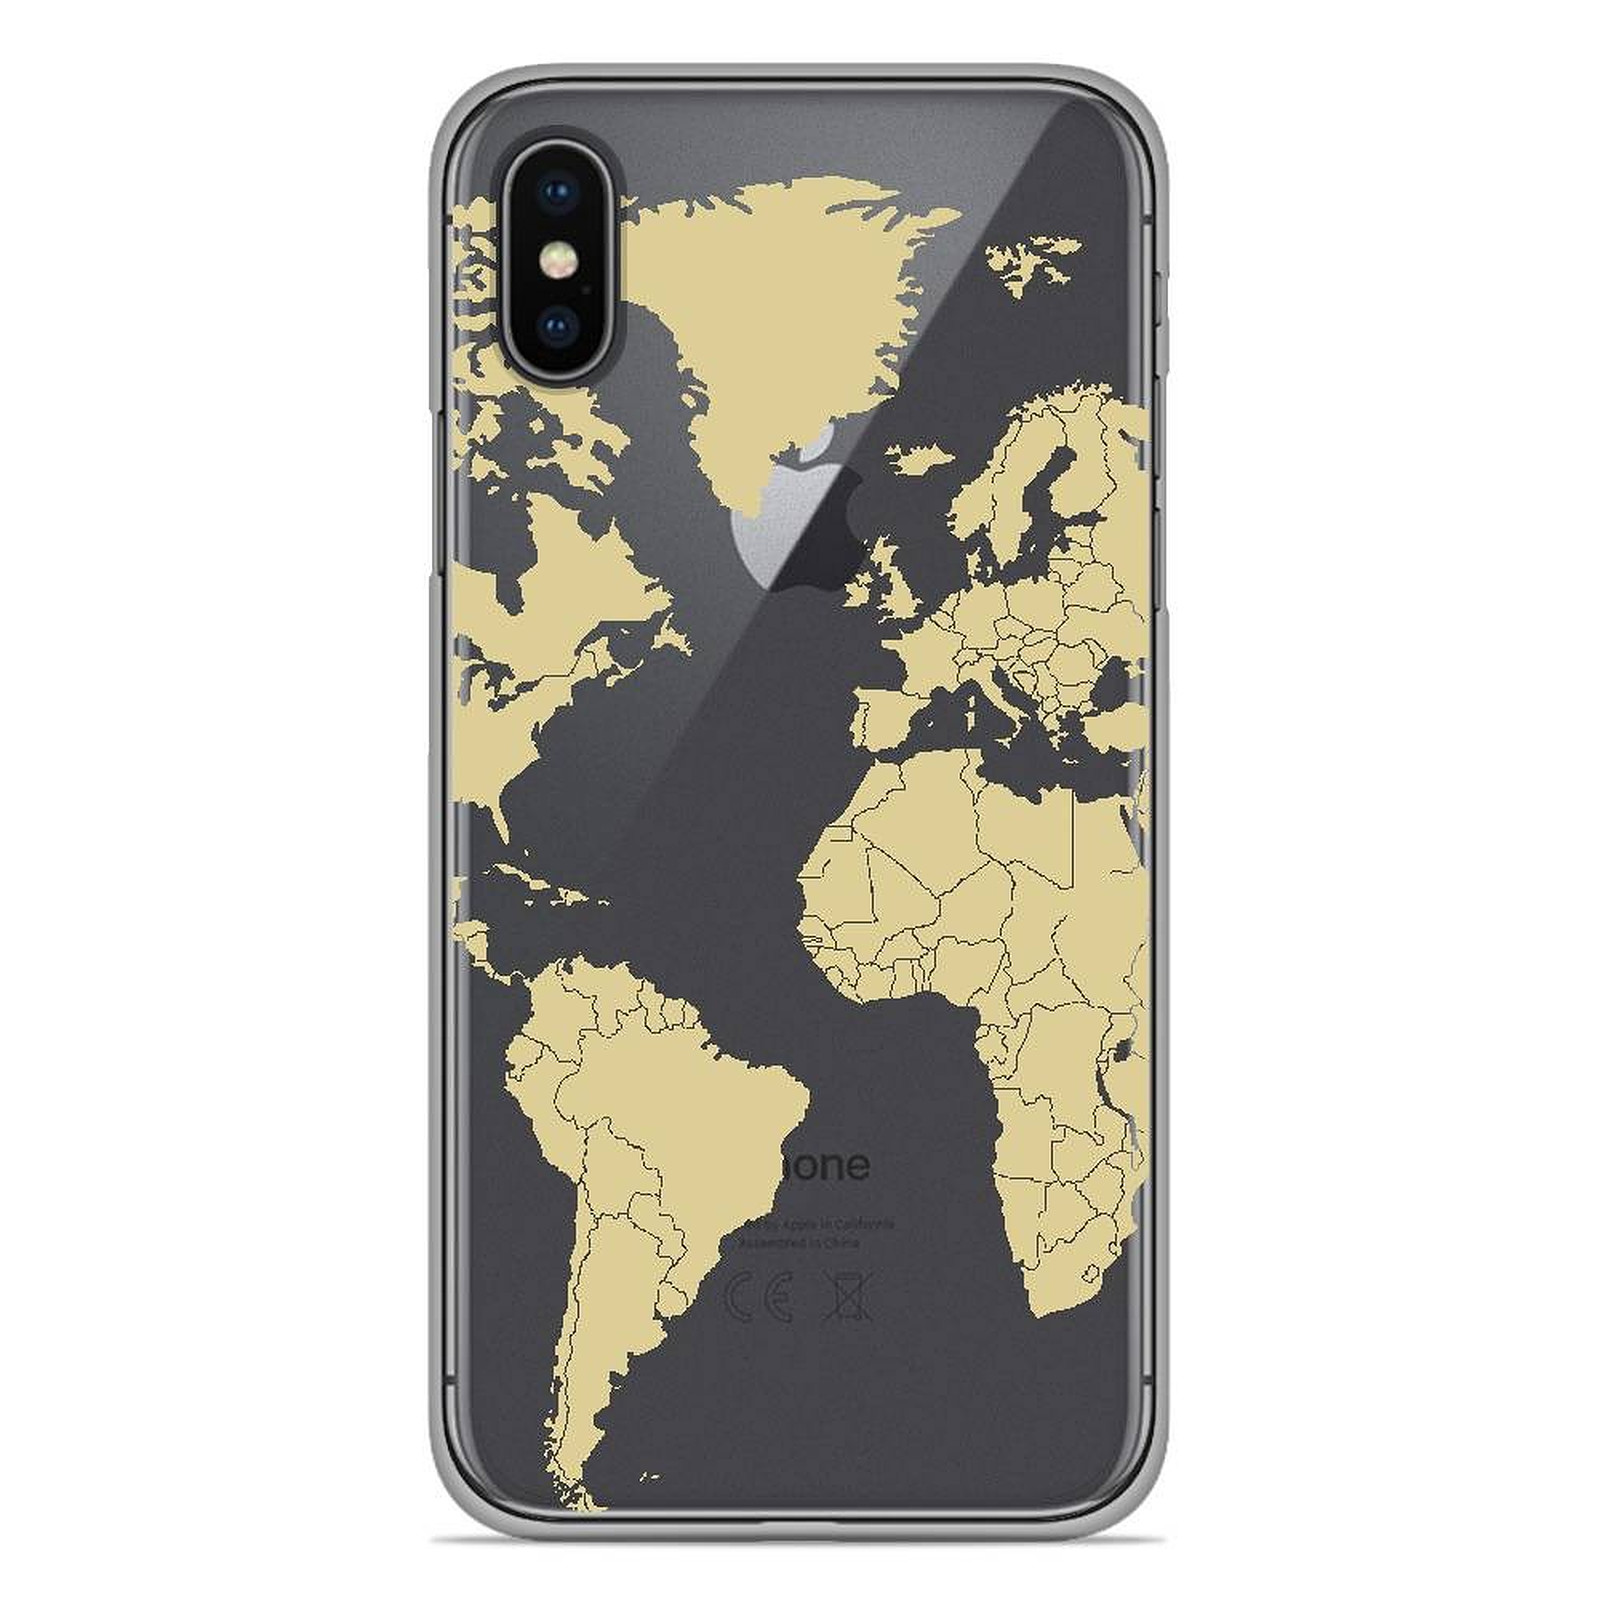 1001 Coques Coque silicone gel Apple iPhone XS Max motif Map beige - Coque telephone 1001Coques